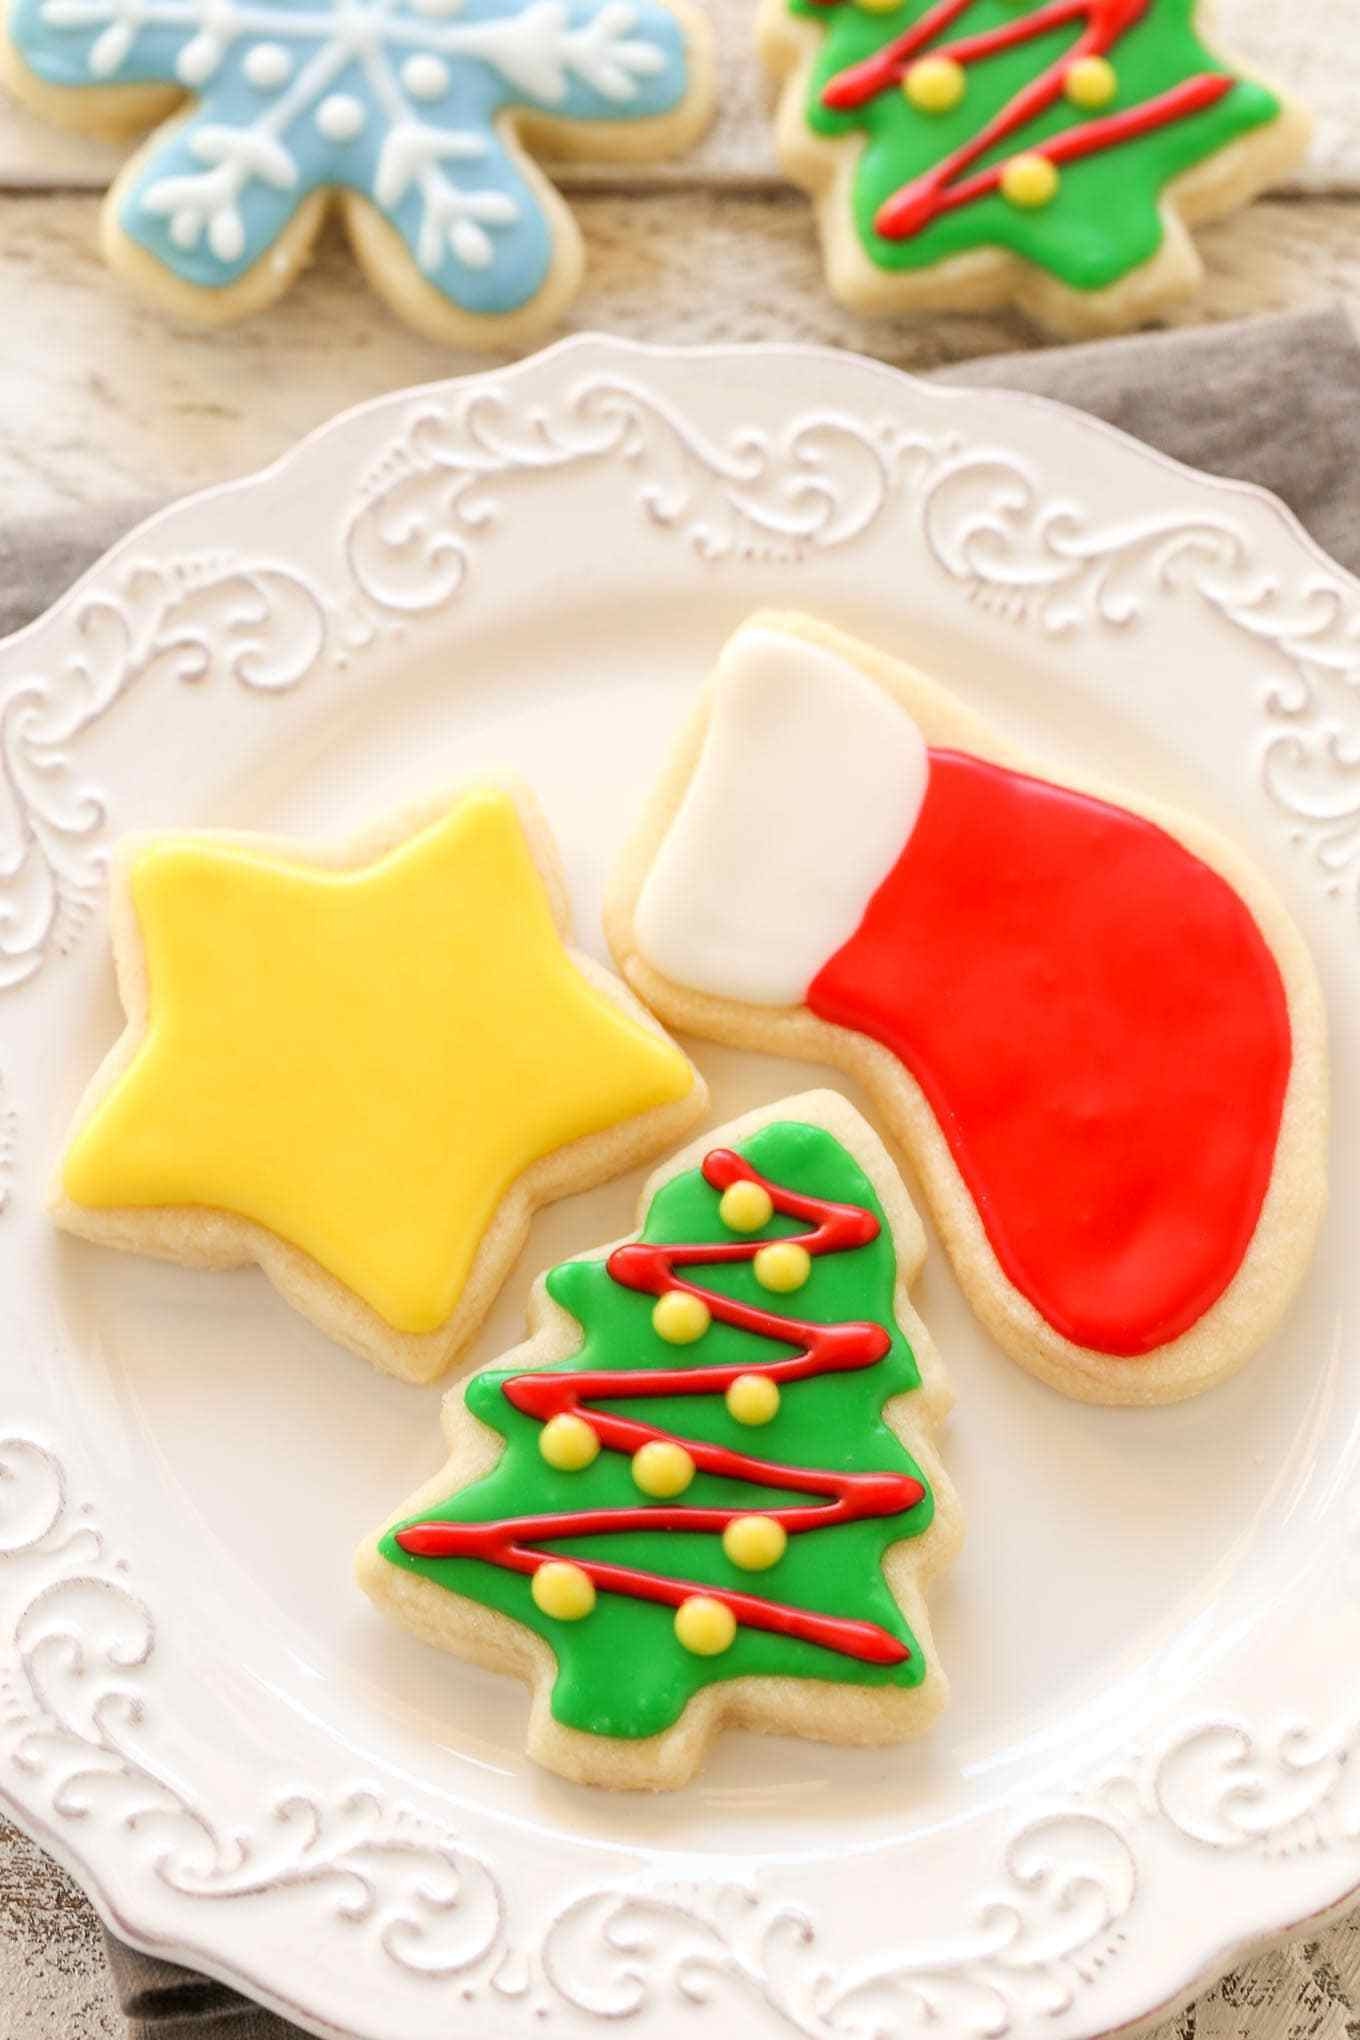 Christmas Sugar Cookies Recipes
 Soft Christmas Cut Out Sugar Cookies Live Well Bake ten